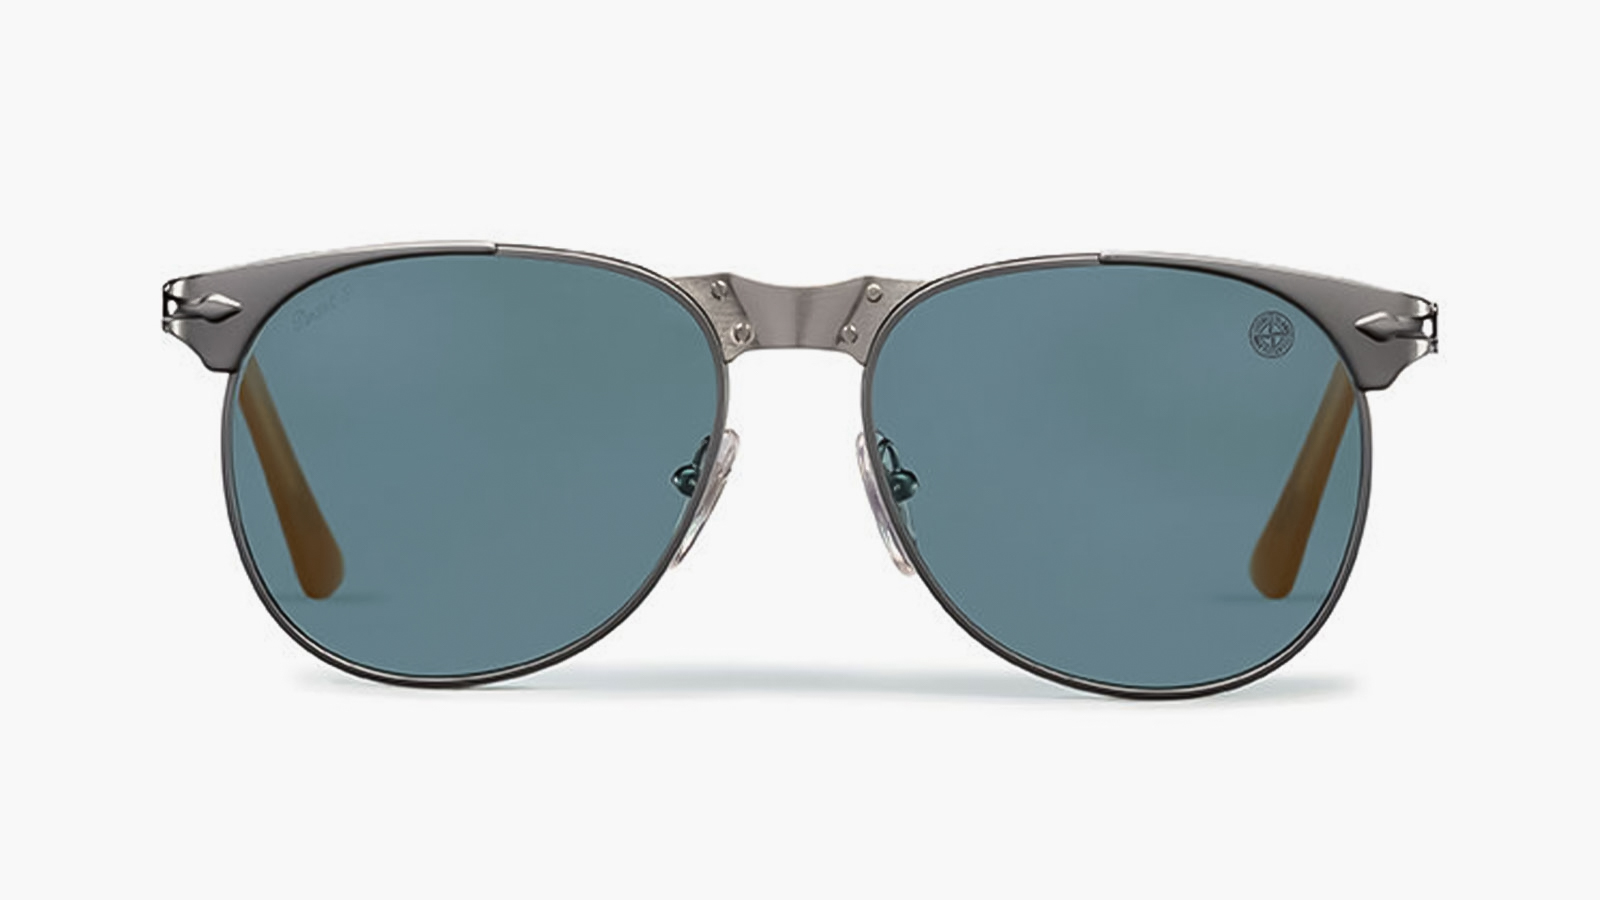 Stone Island And Persol Announce The Refined PO2470S Pilot Frame - IMBOLDN